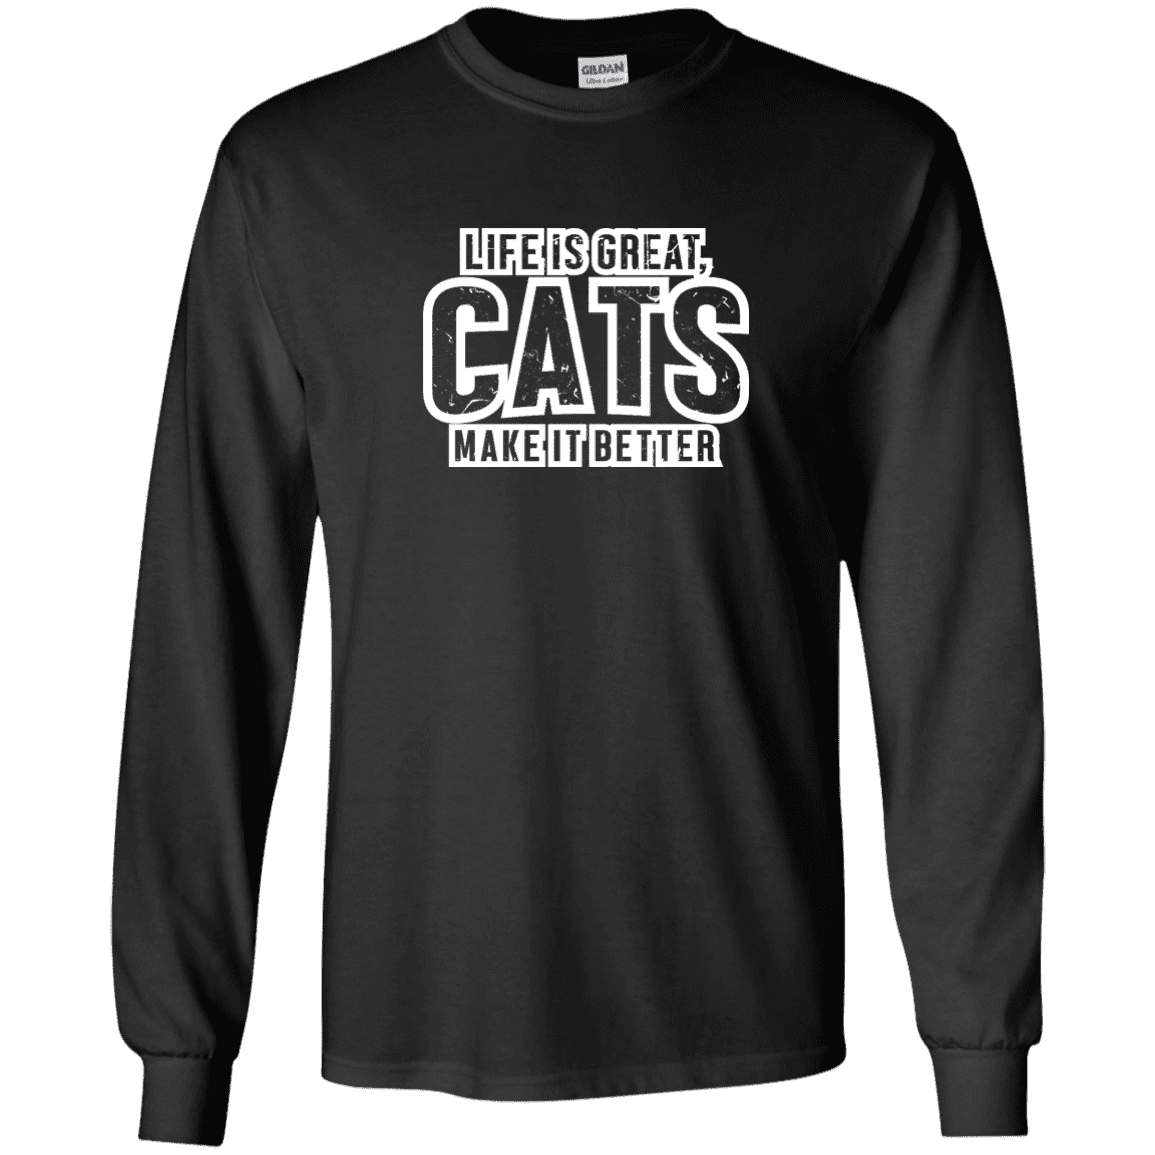 Life Is Great Cats - Long Sleeve T Shirt.